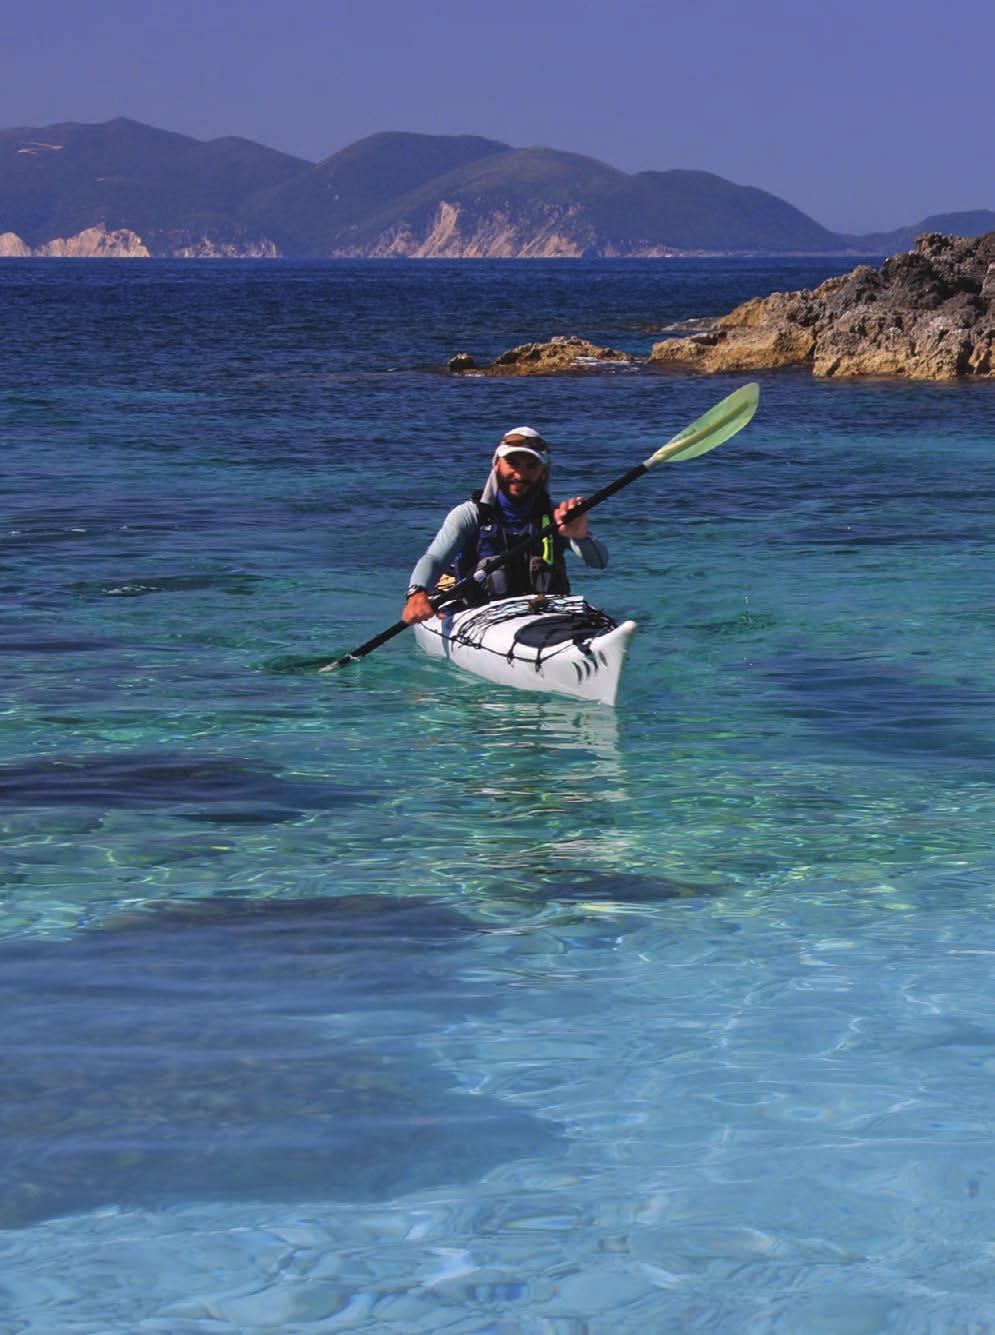 Sea kayaking - International Surf kayaking courses Expeditions - Journey into the wilderness Greece Sea Kayaking Expedition - 7days The island of Kefalonia lies in the Ionian Sea off the west coast